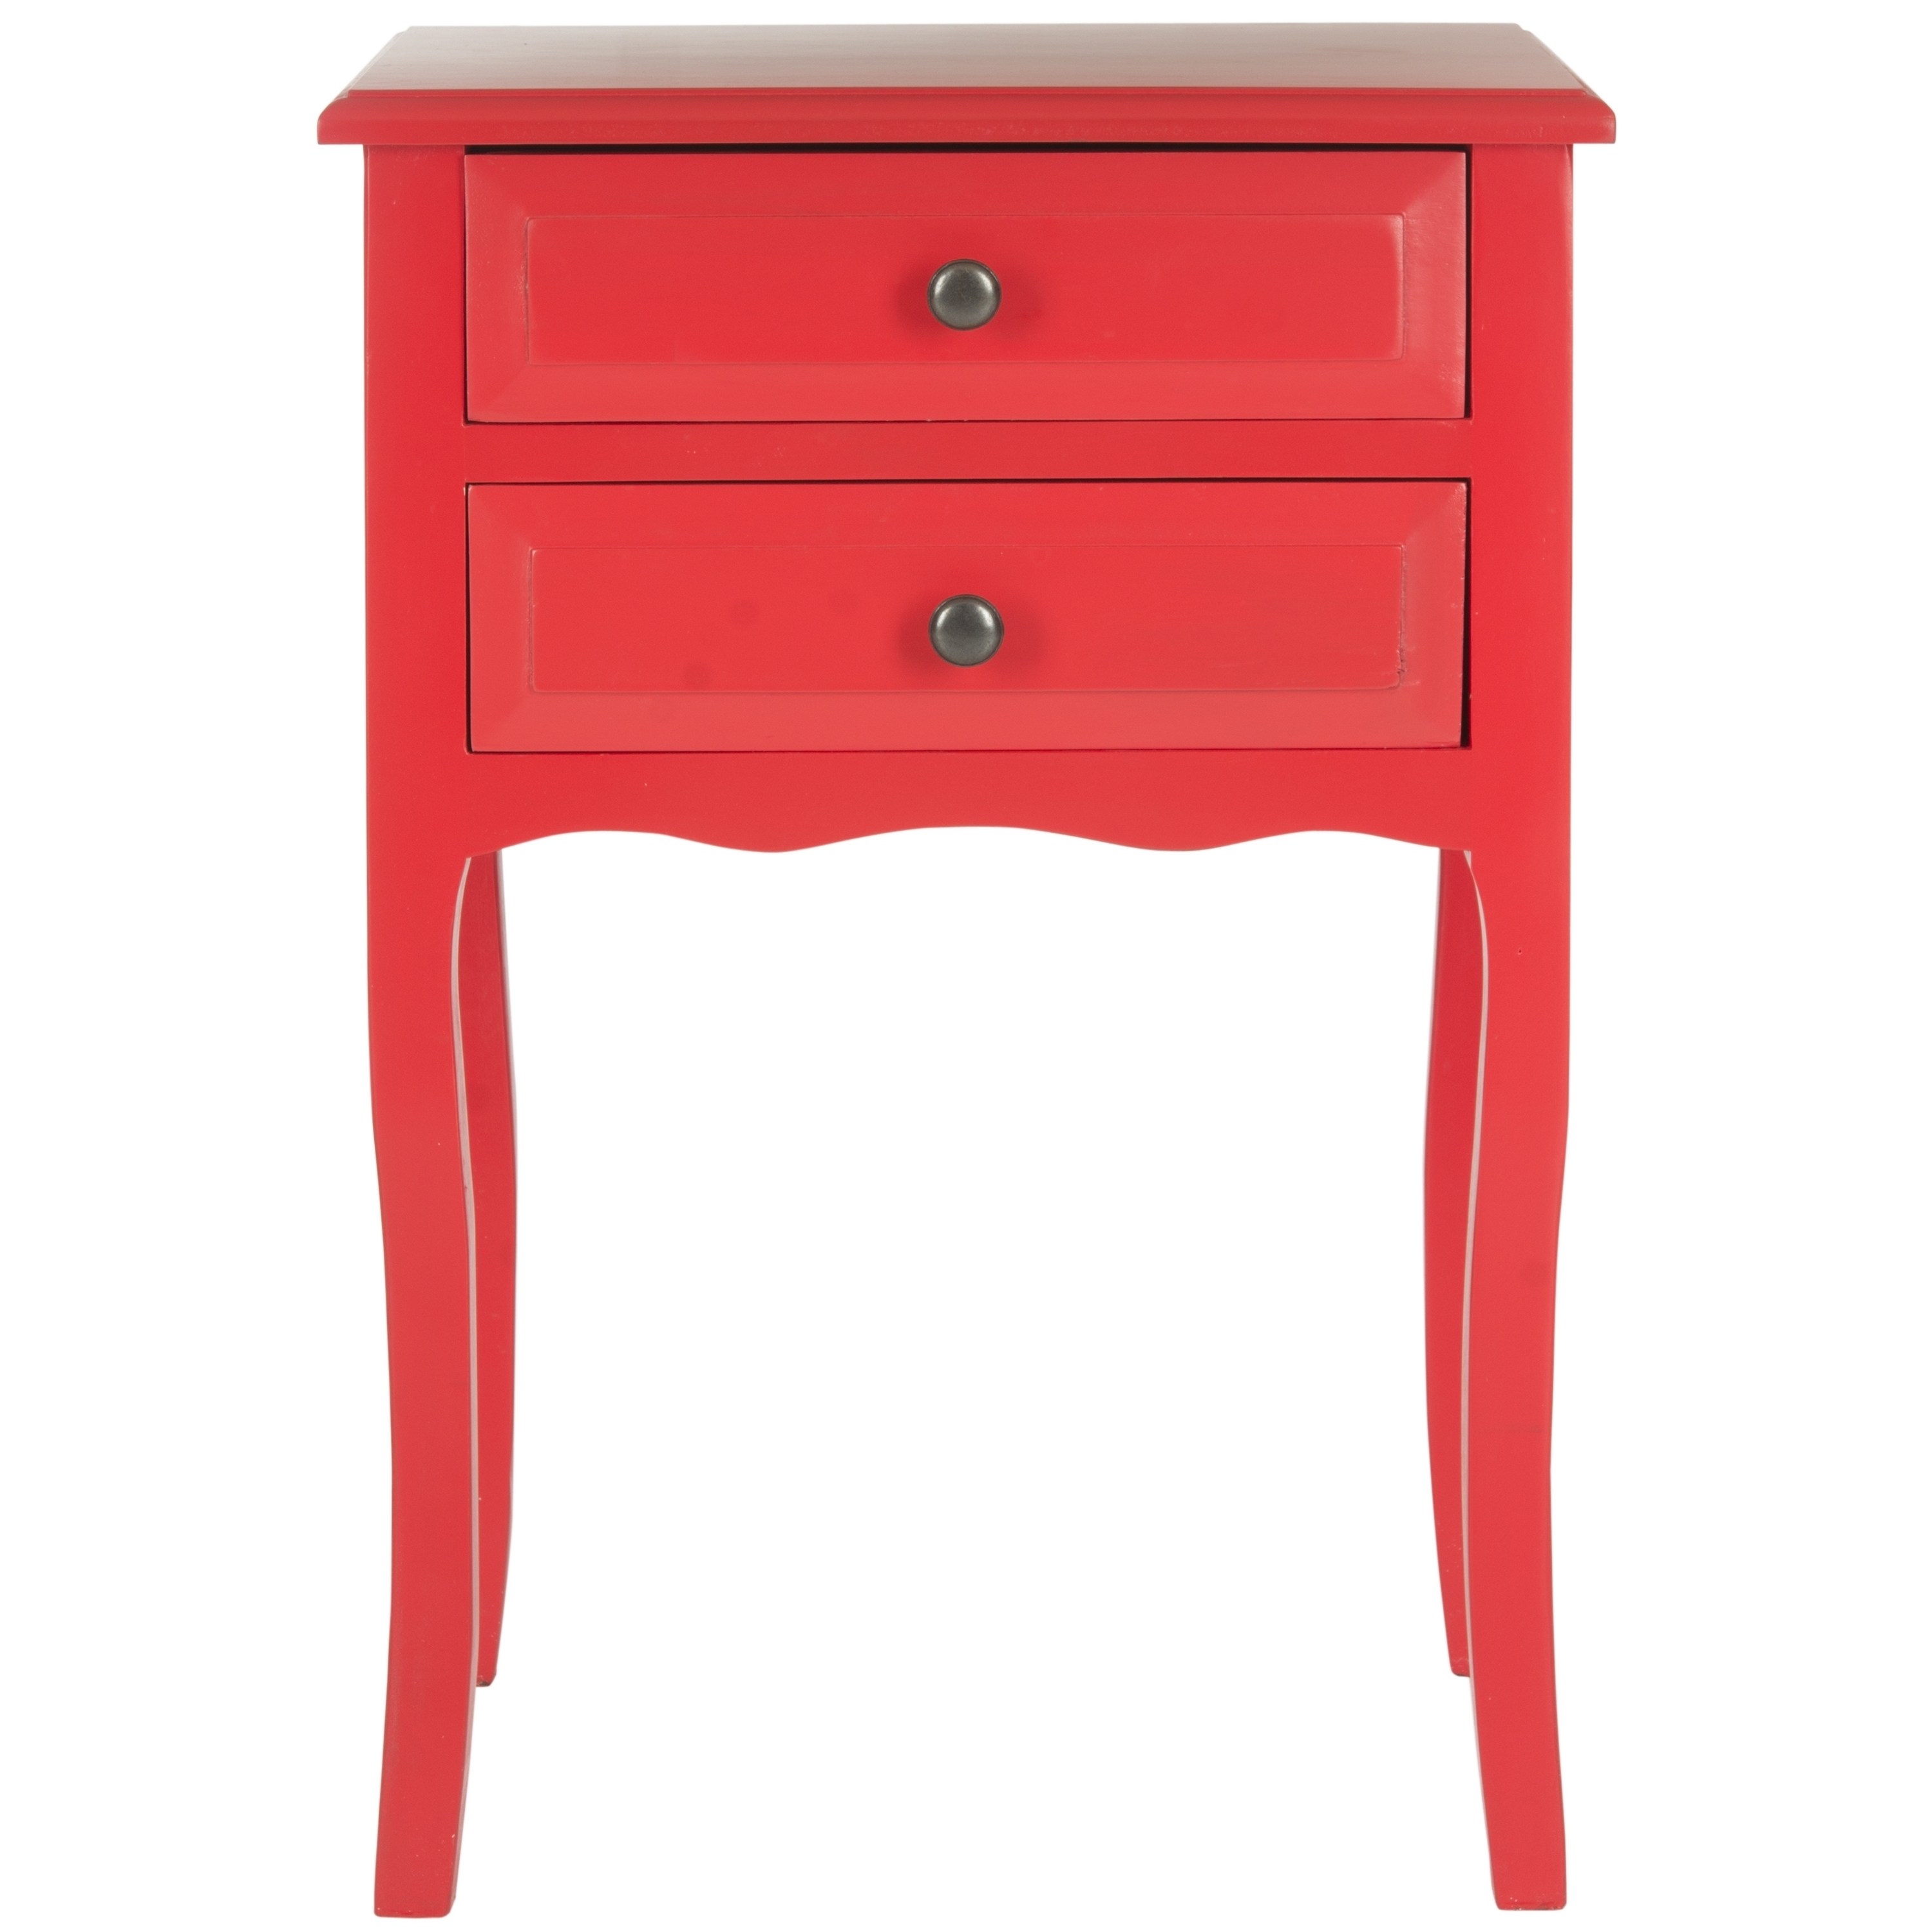 safavieh lori red accent table free shipping today wood side with drawers living room battery operated bedroom lights bird corner coffee tray ikea ballard designs outdoor cushions